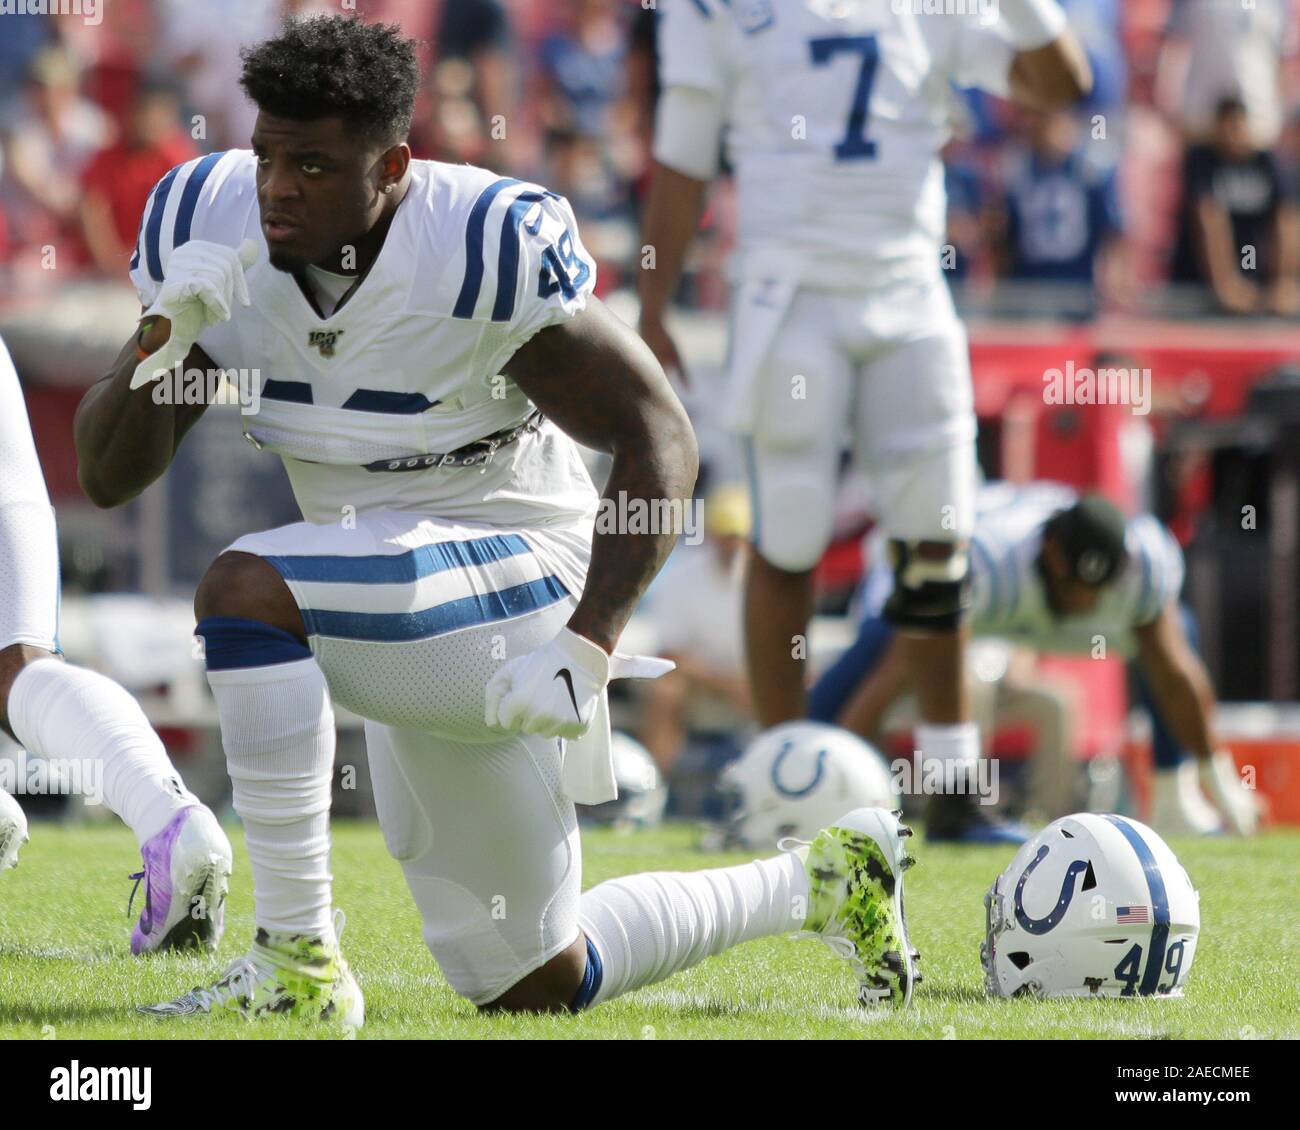 Tampa, Florida, USA. 8th Dec, 2019. Indianapolis Colts linebacker Matthew Adams (49) stretches before the NFL game between the Indianapolis Colts and the Tampa Bay Buccaneers held at Raymond James Stadium in Tampa, Florida. Andrew J. Kramer/Cal Sport Media/Alamy Live News Stock Photo